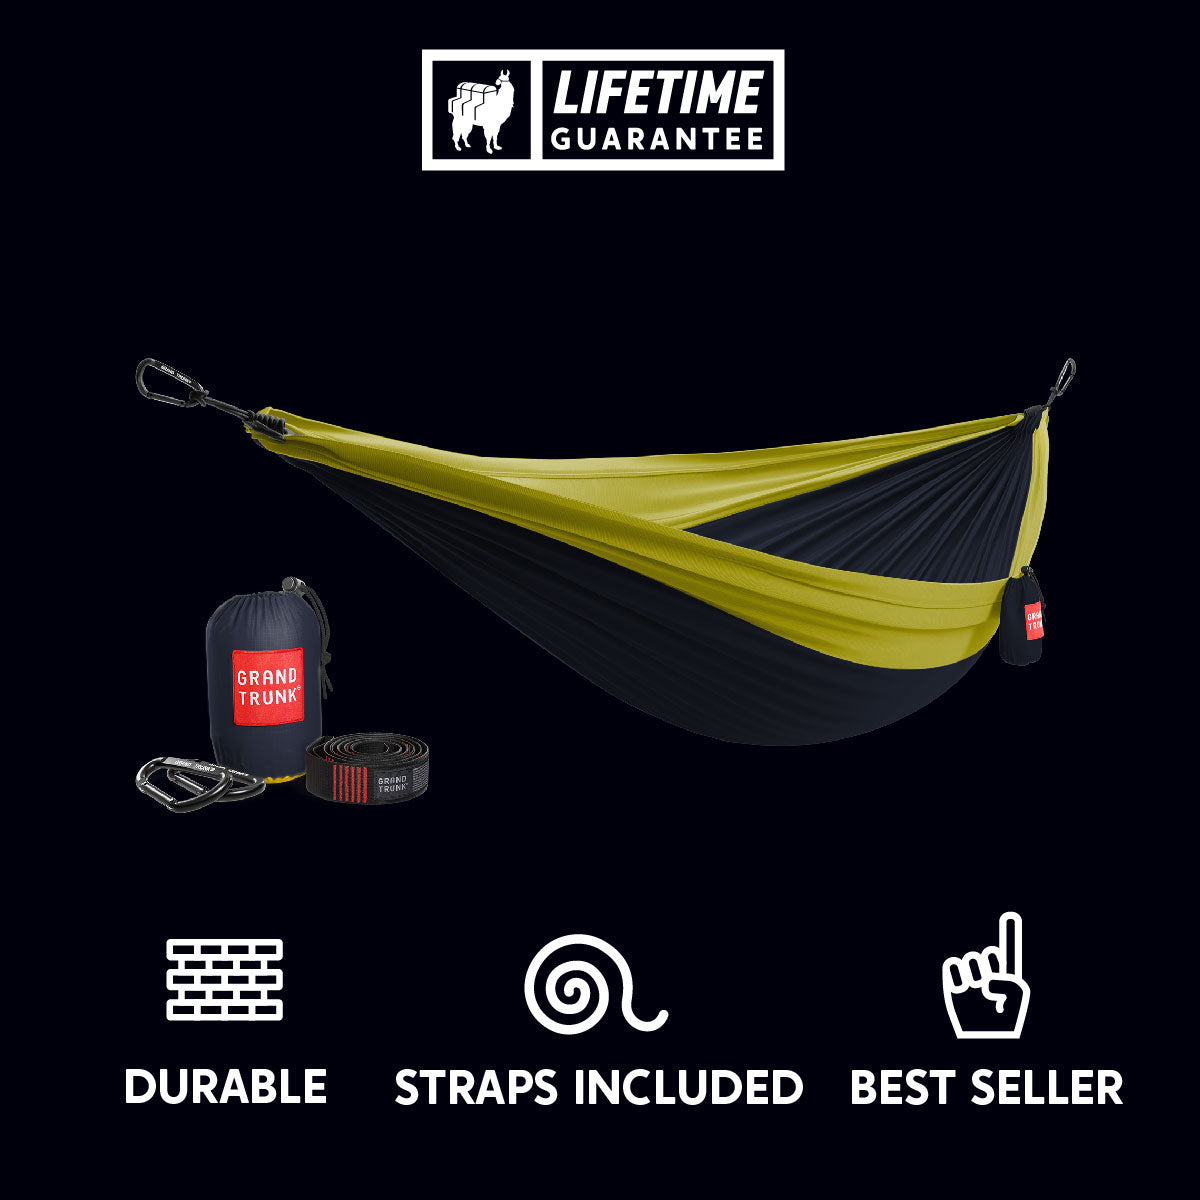 durable navy and chartreuse green parachute nylon hammock with straps included. best seller.